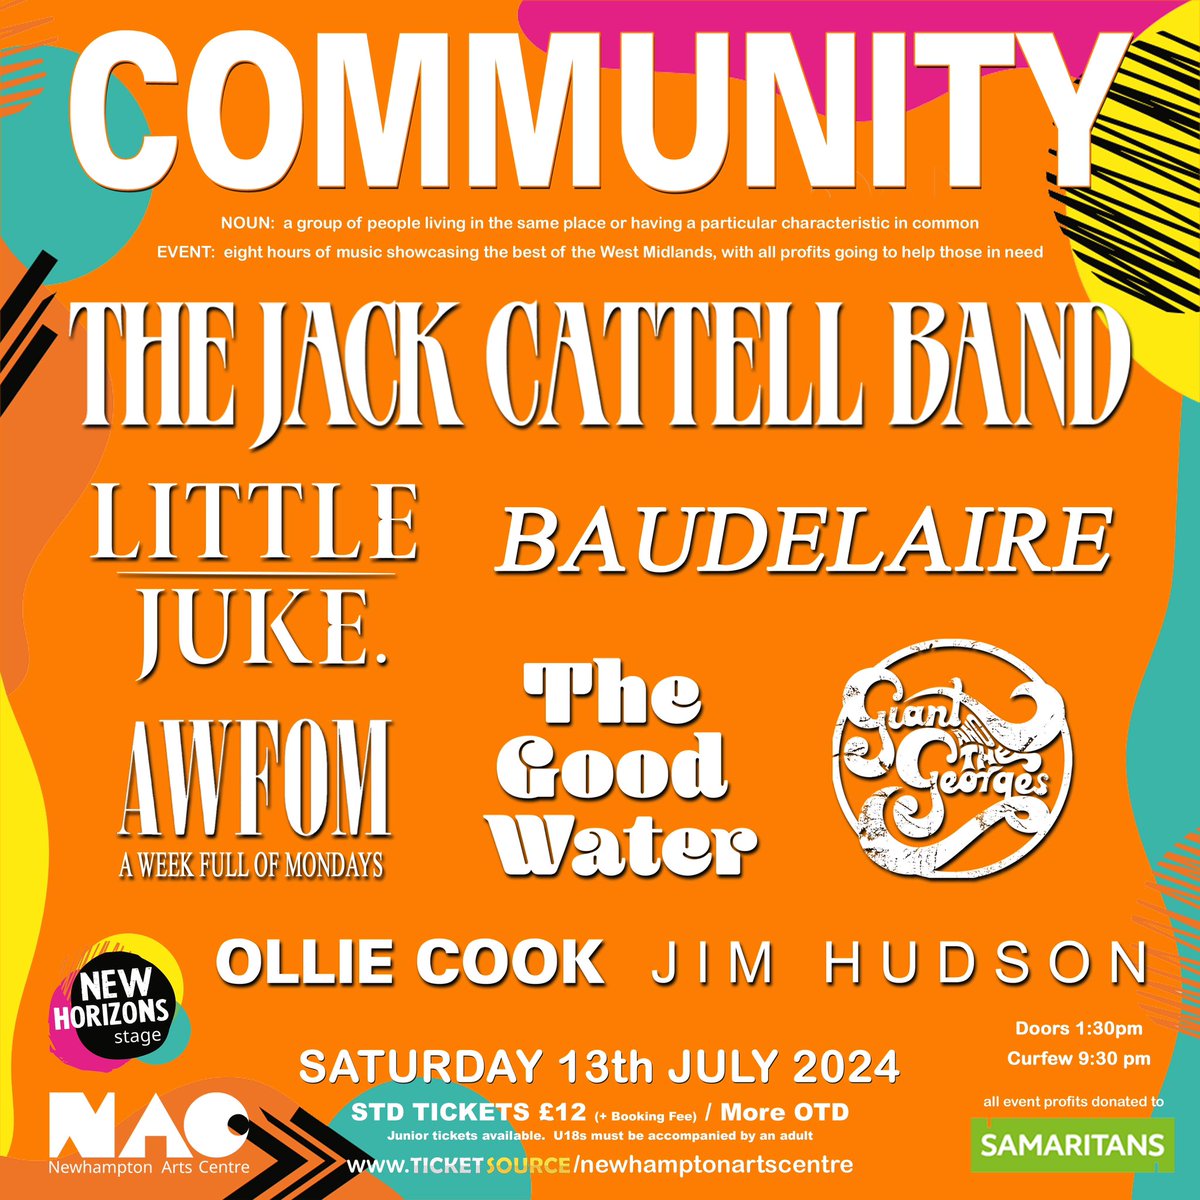 WOLVERHAMPTON!! We’re looking forward to returning to the Newhampton Arts Centre this Summer for this year’s Community show; raising money for @samaritans We play the NAC on Saturday 13th July with a heap of other amazing, local acts. We hope to see you there!! Get those